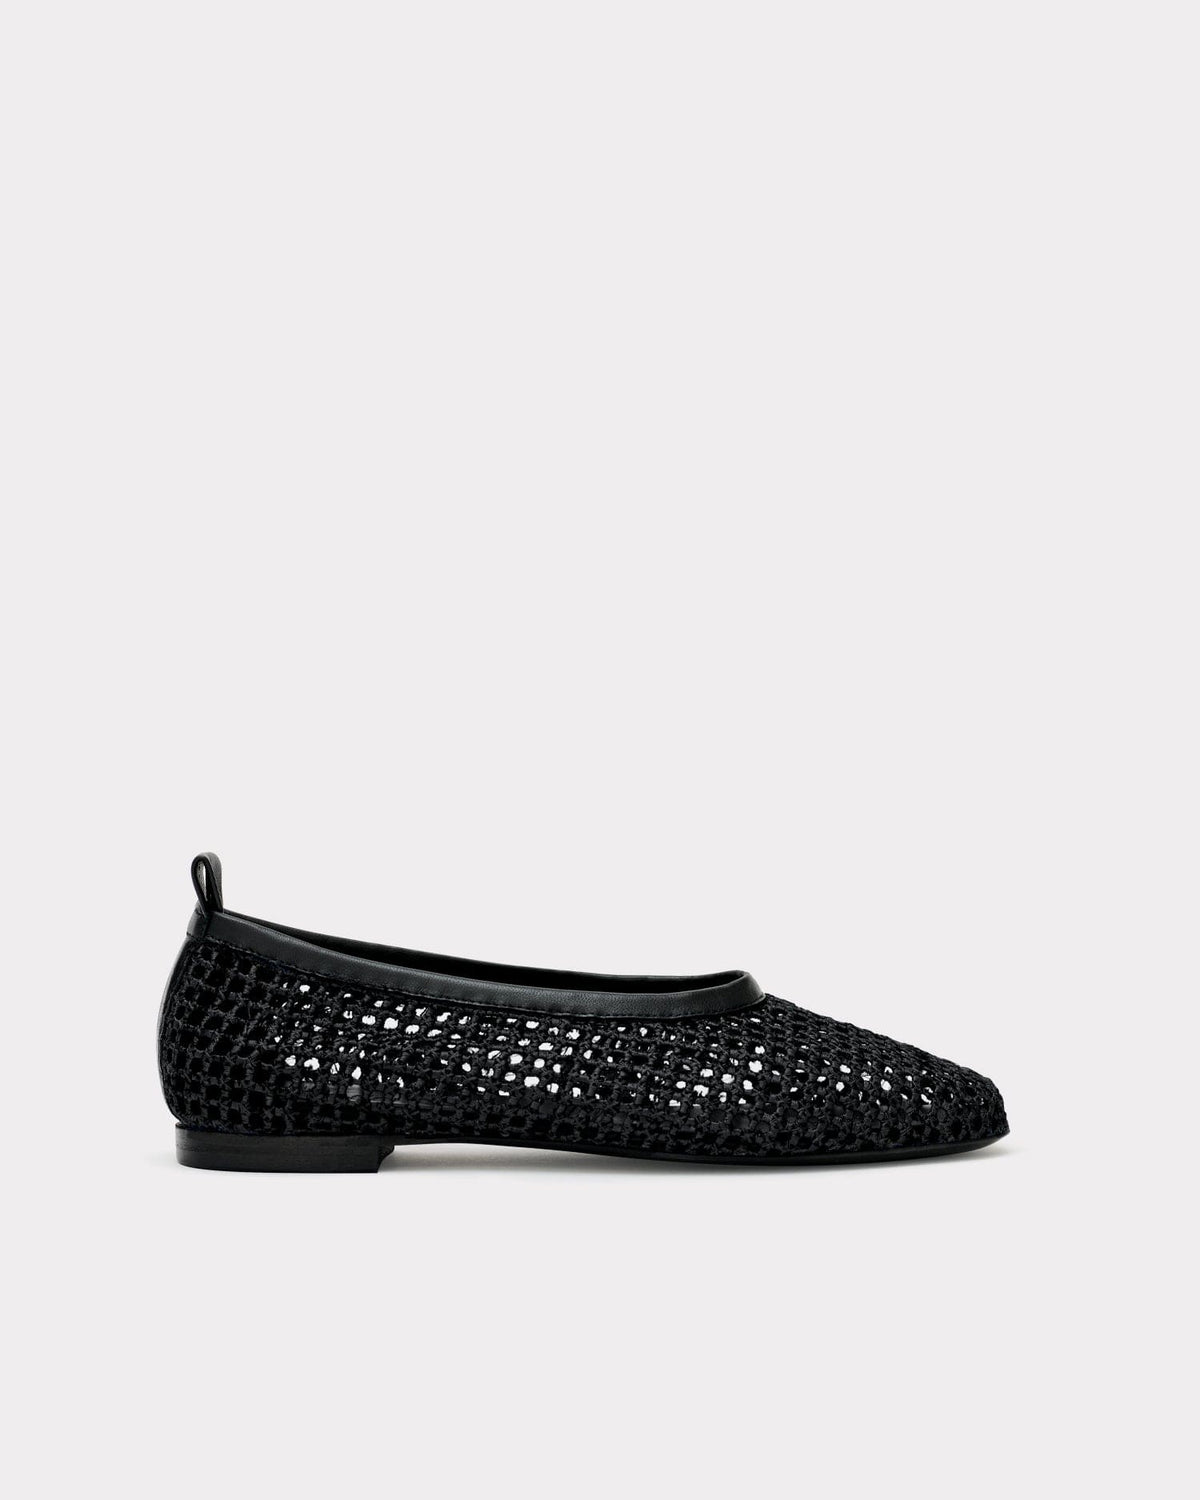 The Foundation Flat - Black Woven Shoes ESSĒN Black Sustainable Satin 35